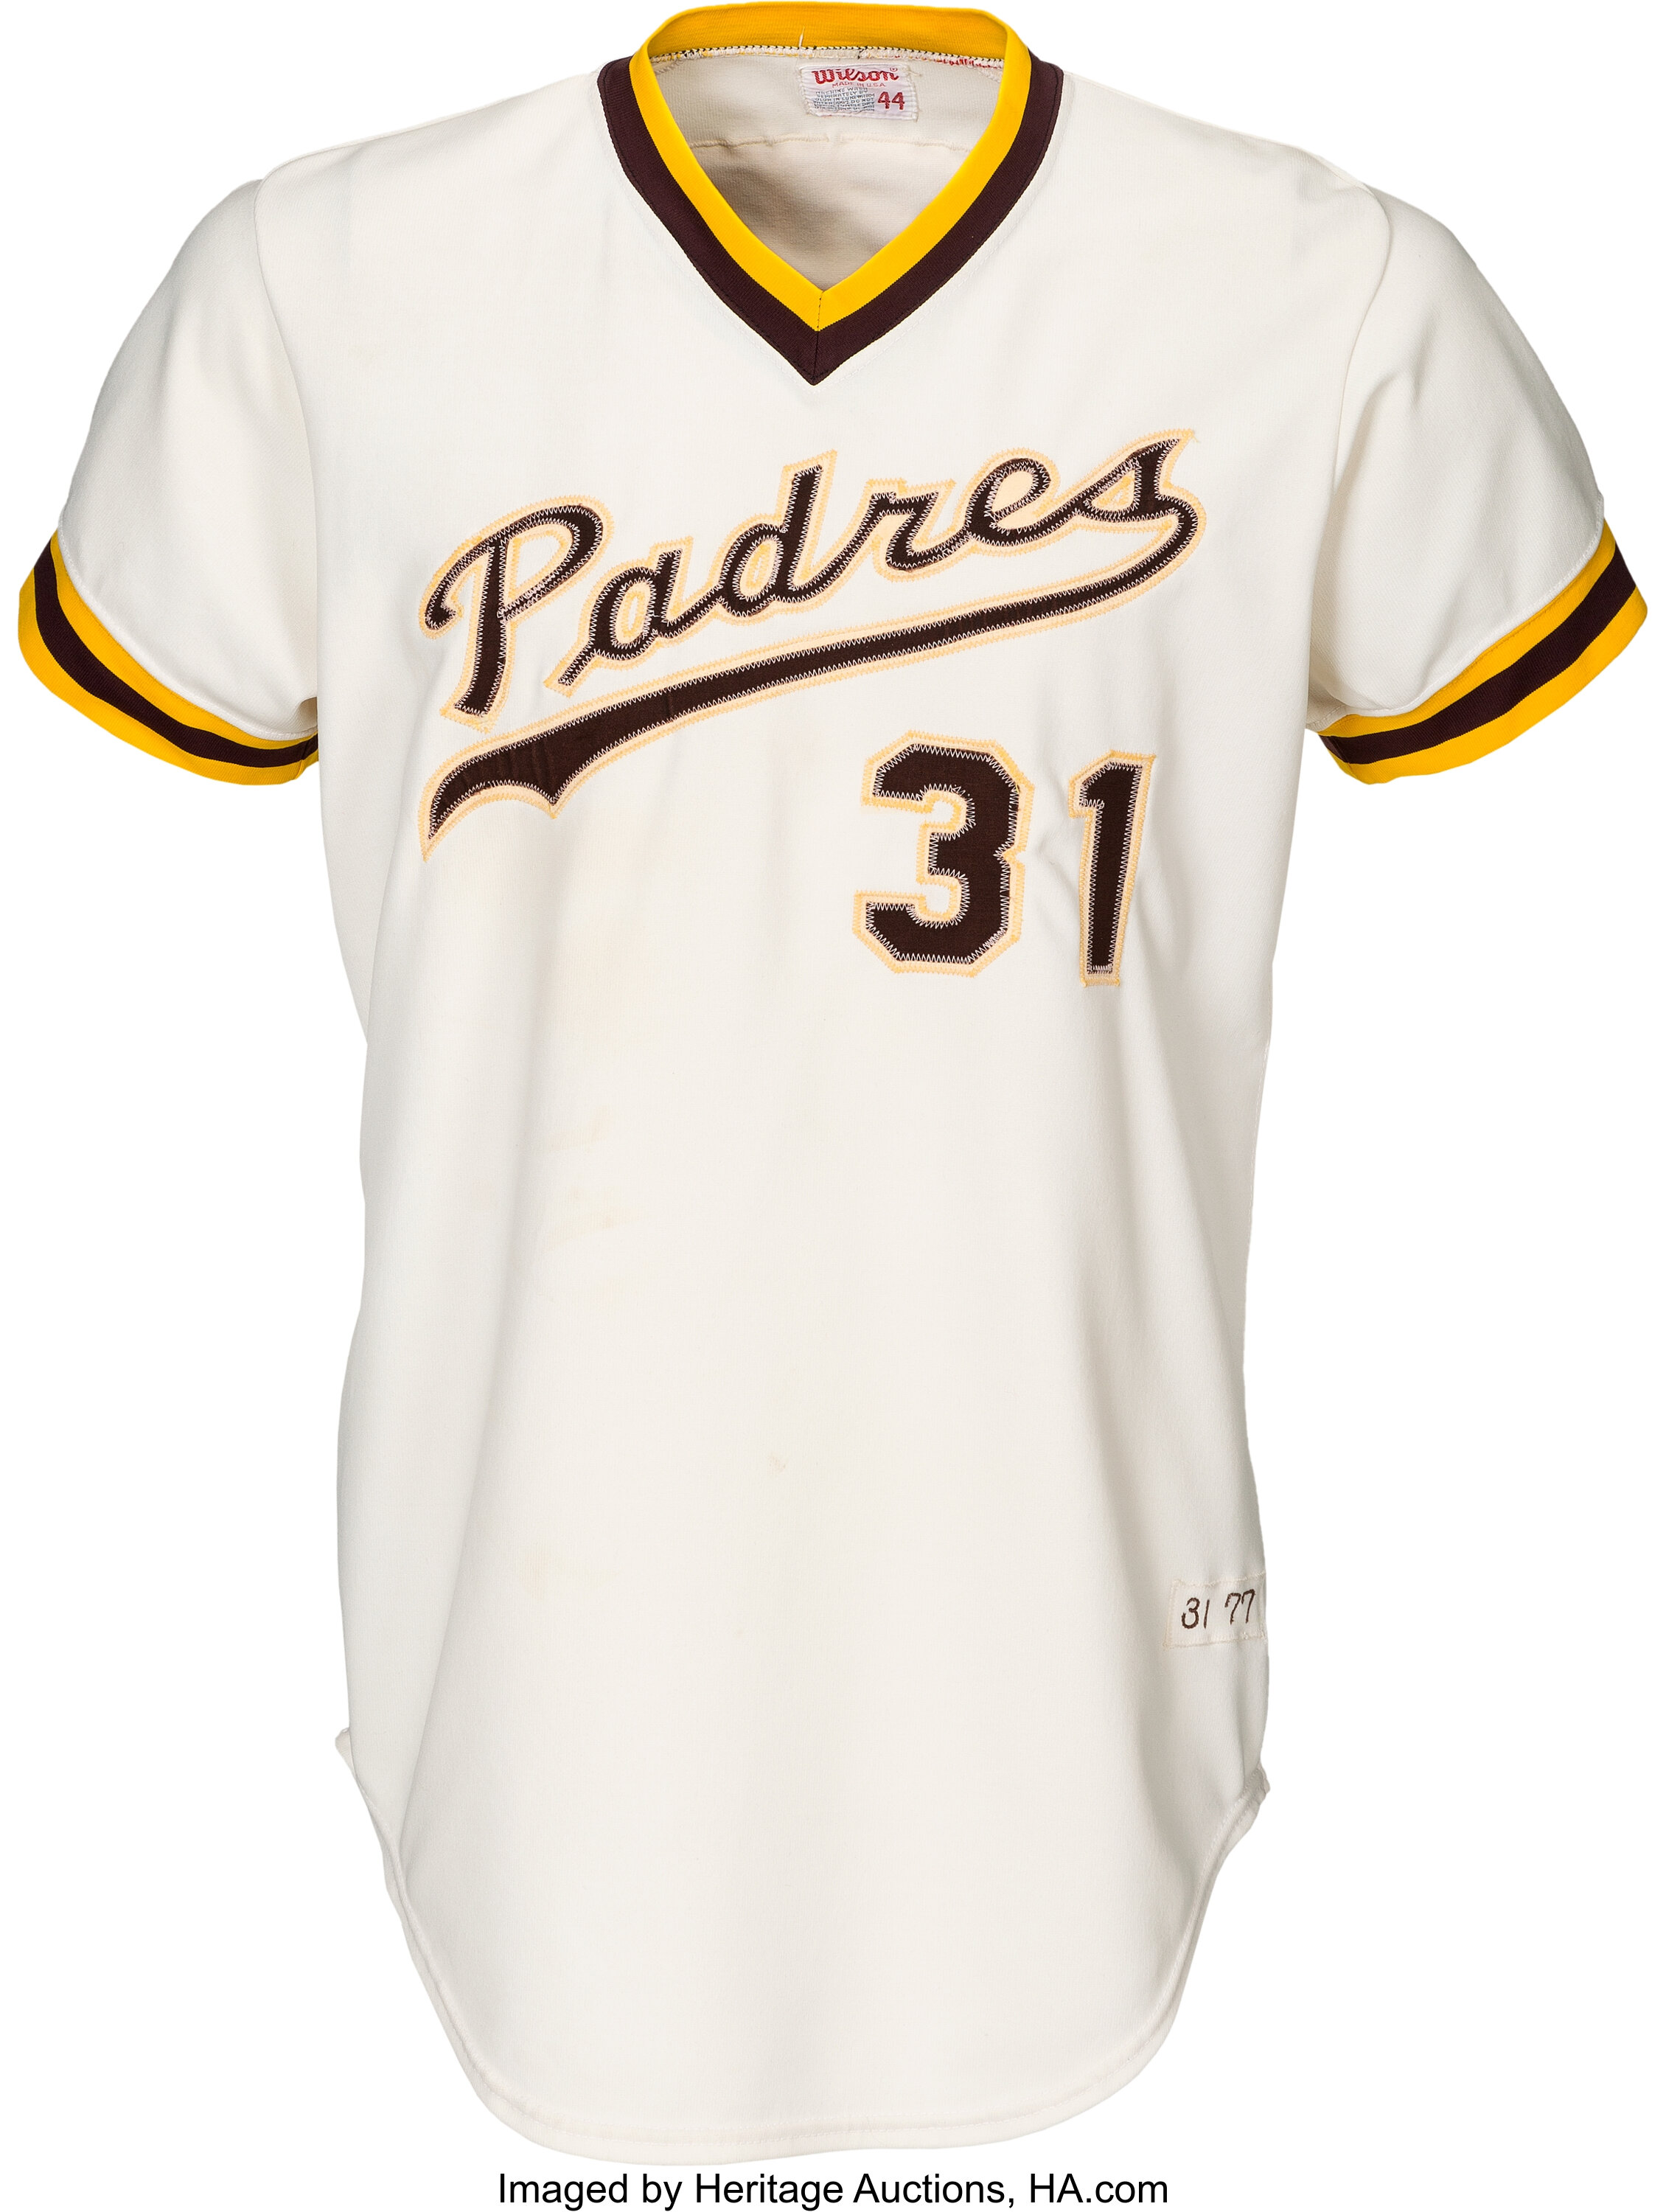 1977 Dave Winfield Game Worn San Diego Padres Jersey, MEARS A10